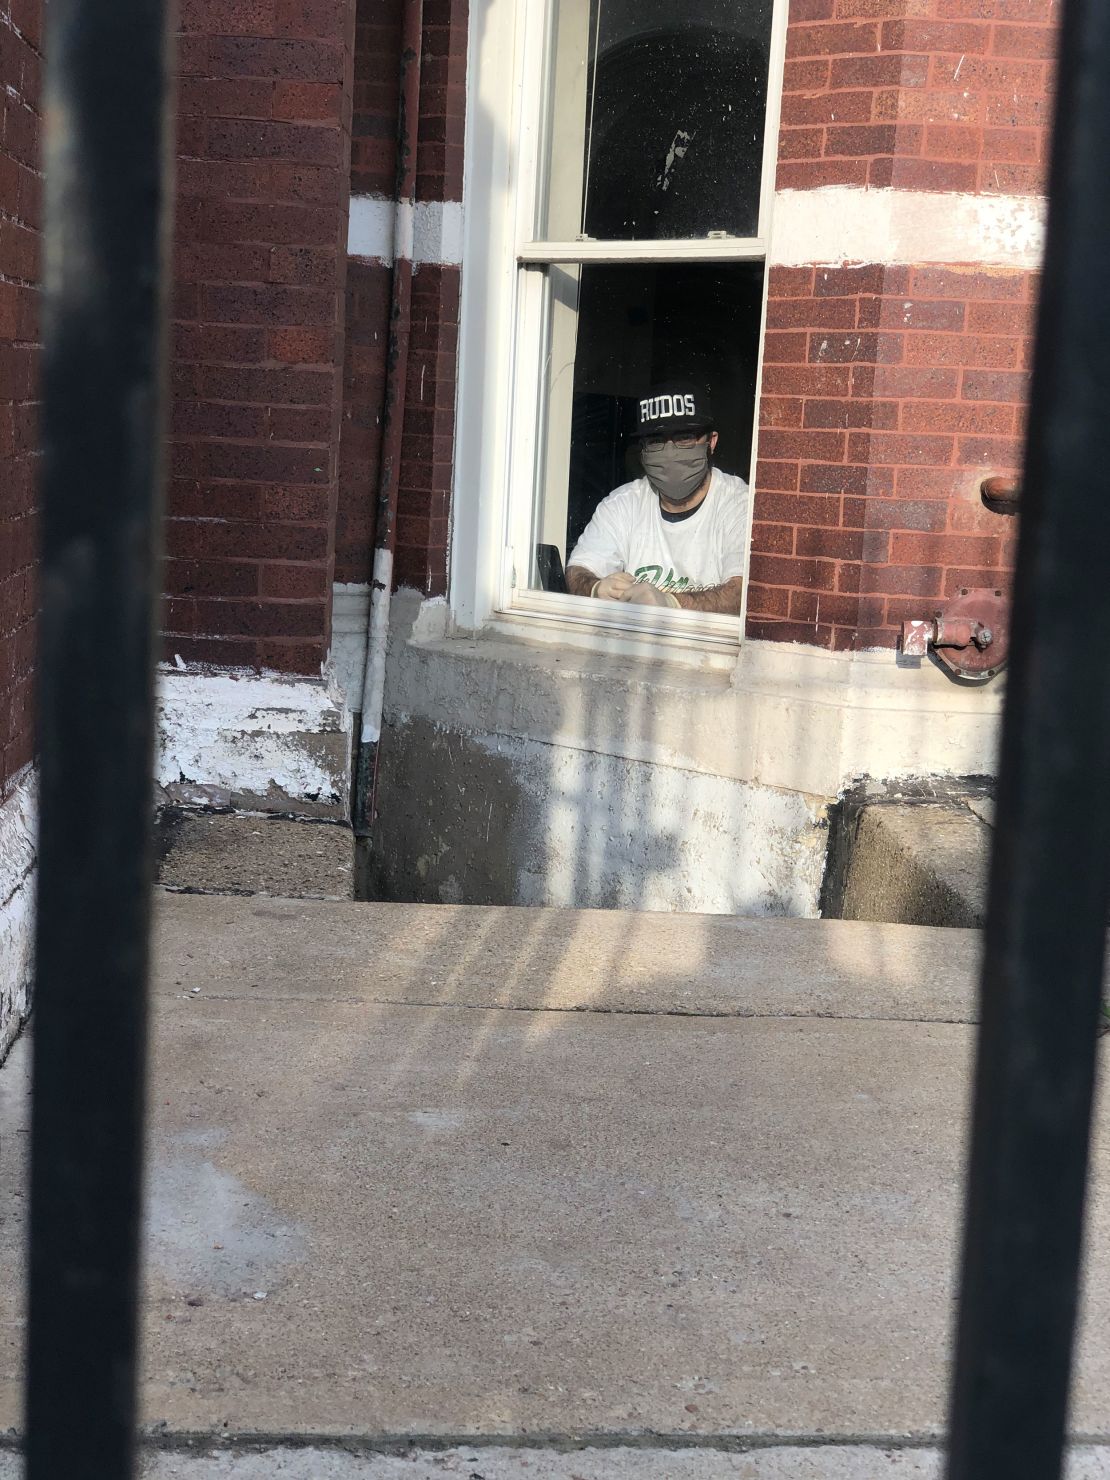 Alex "Demo" Ramirez speaks to CNN through the window of his basement apartment. He was diagnosed with Covid-19 on May 1.